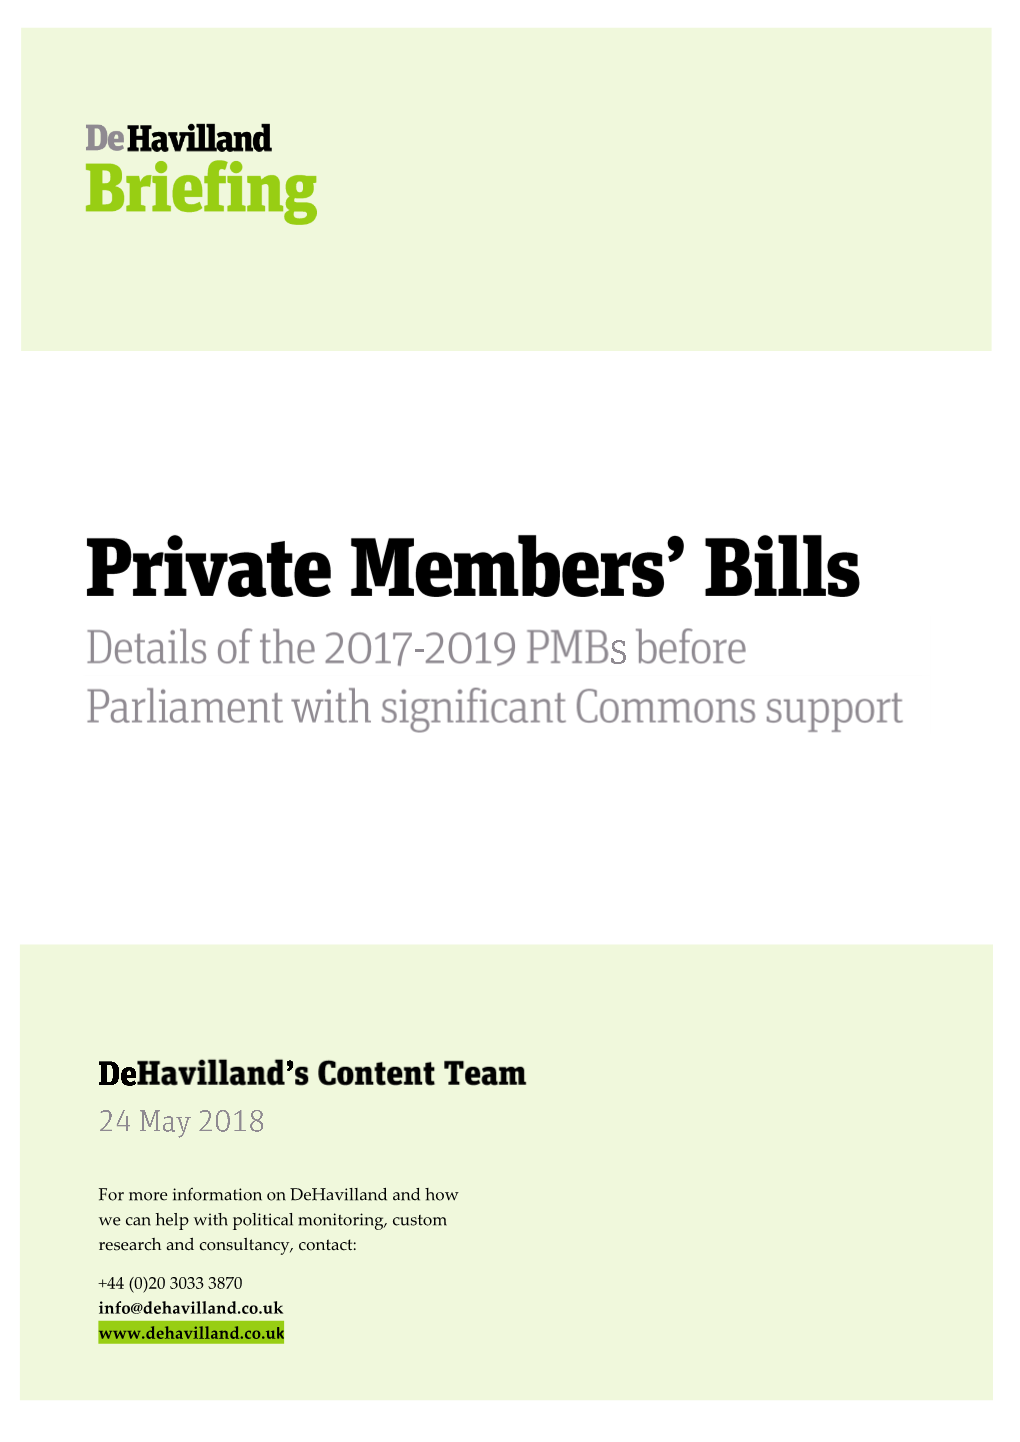 For More Information on Dehavilland and How We Can Help with Political Monitoring, Custom Research and Consultancy, Contact